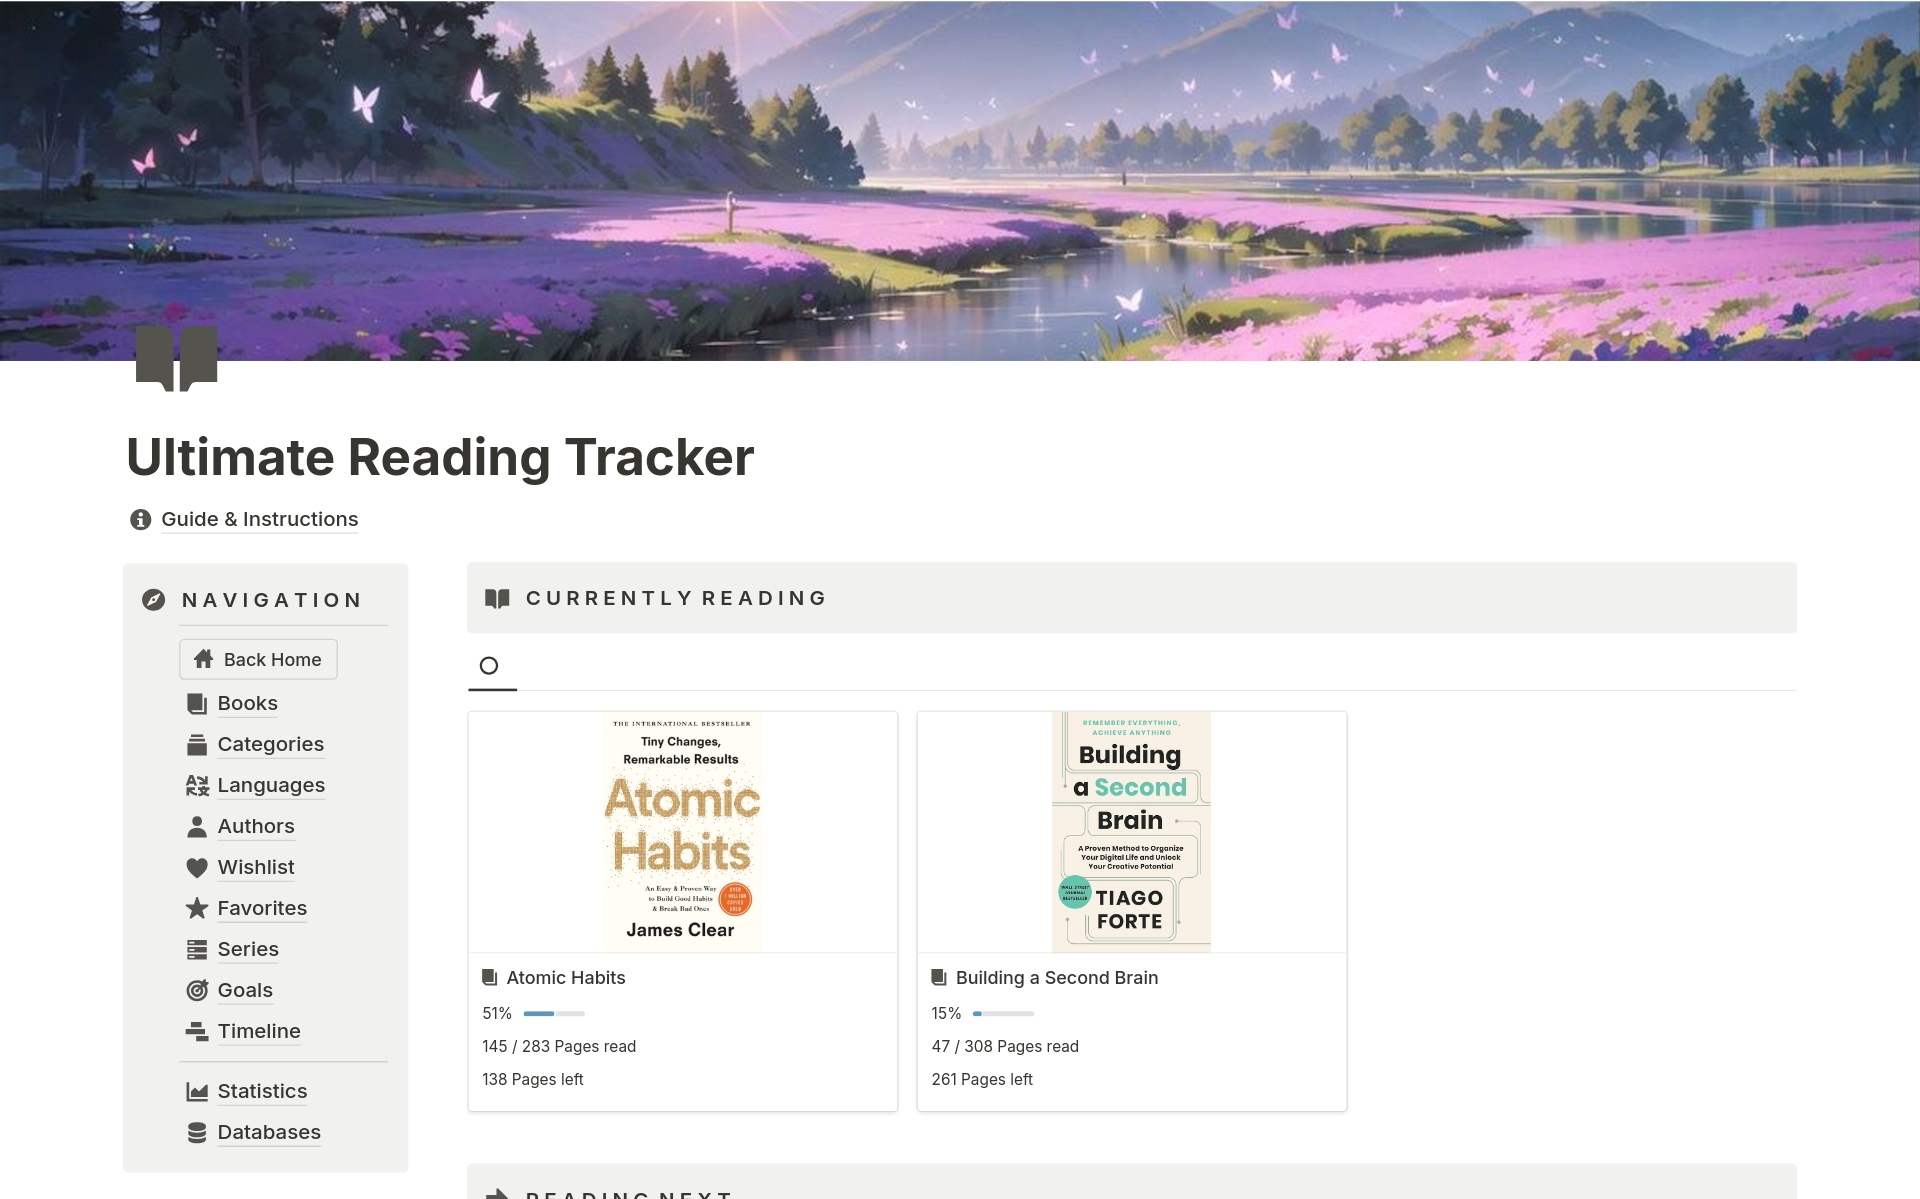 Navigate effortlessly with Main Menu & Quick Actions. Filter by Categories, Languages & Authors. Manage Wishlist, Favorites, & Series. Set Goals, track progress with a Timeline Chart & Statistics Page. Elevate your reading journey, all in one tool!